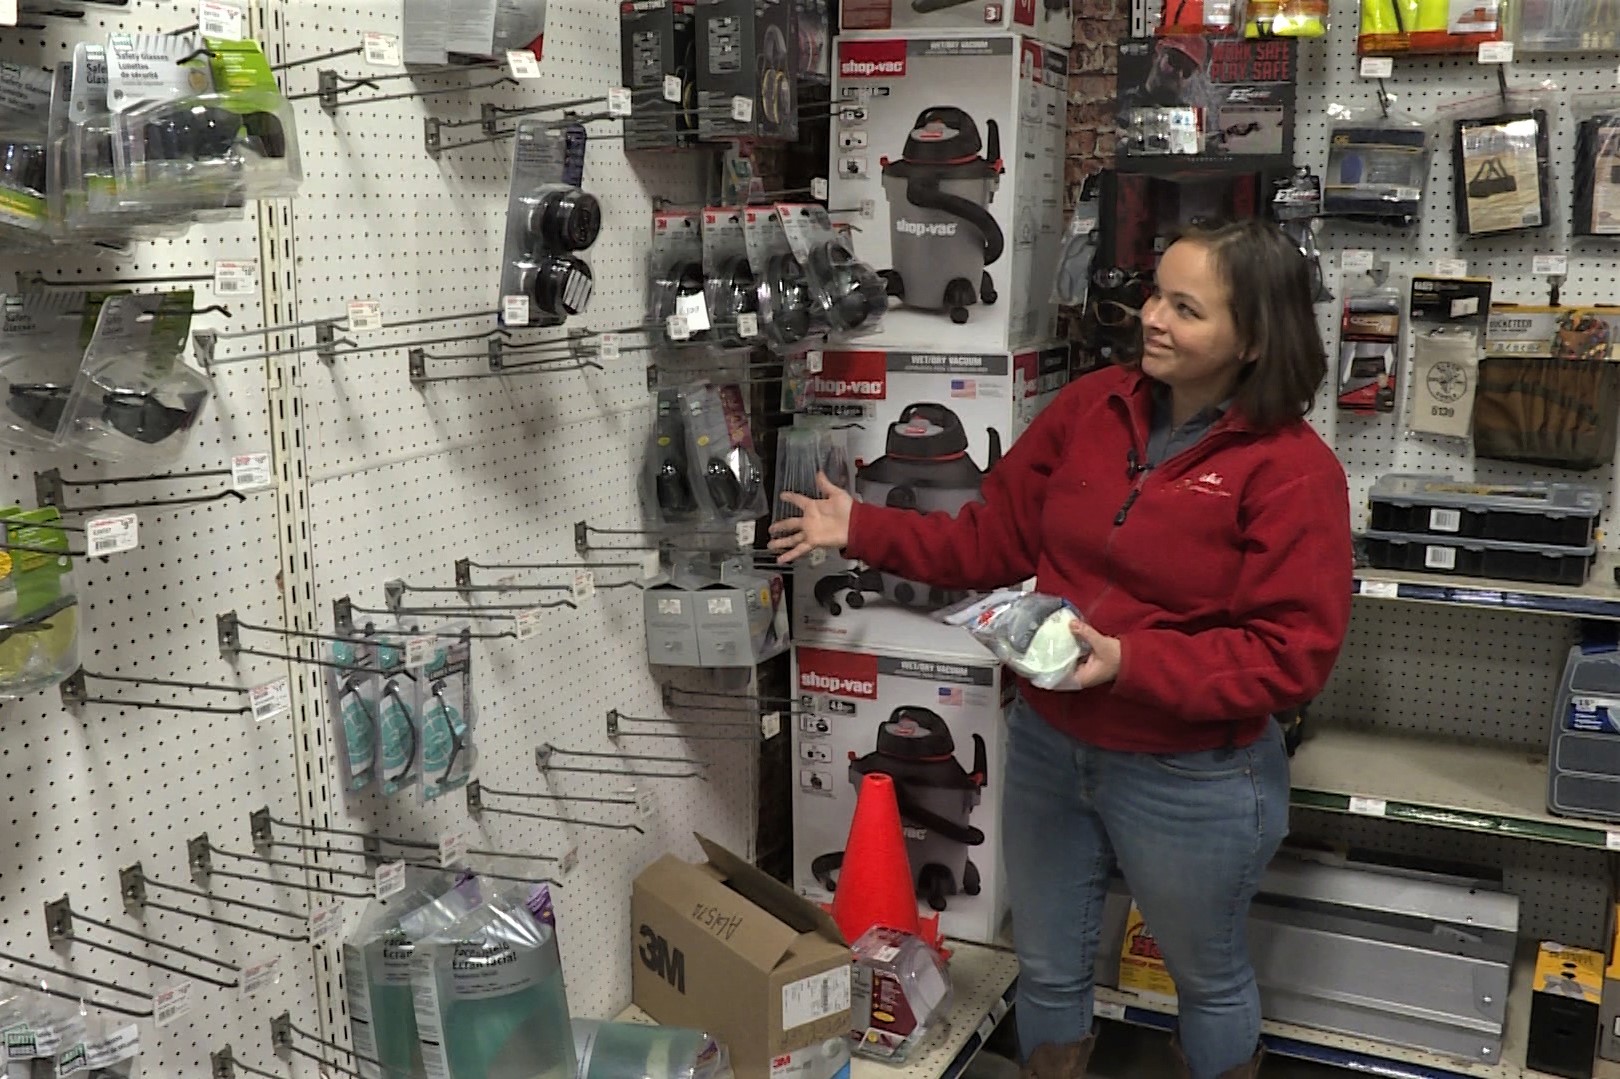 Bloomington Hardware manager Kristi Hill shows off empty racks where construction and respirator masks are usually displayed.